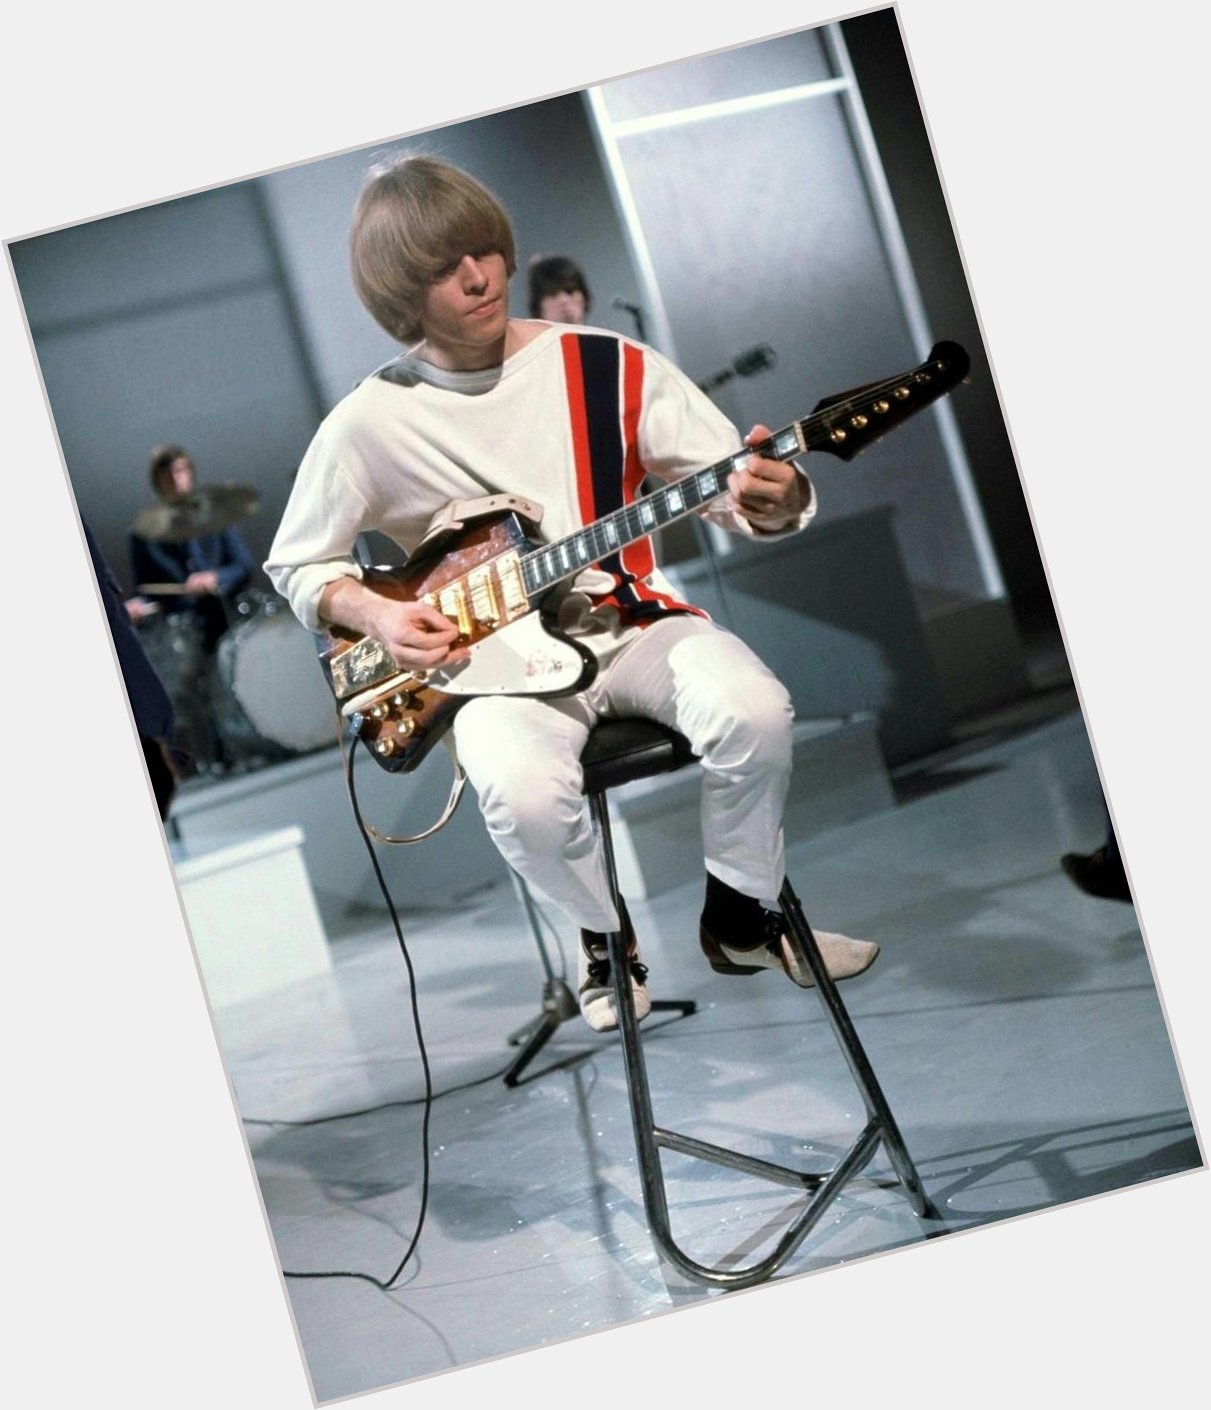 Happy birthday Brian Jones. He would have been 77 today if he had lived. 